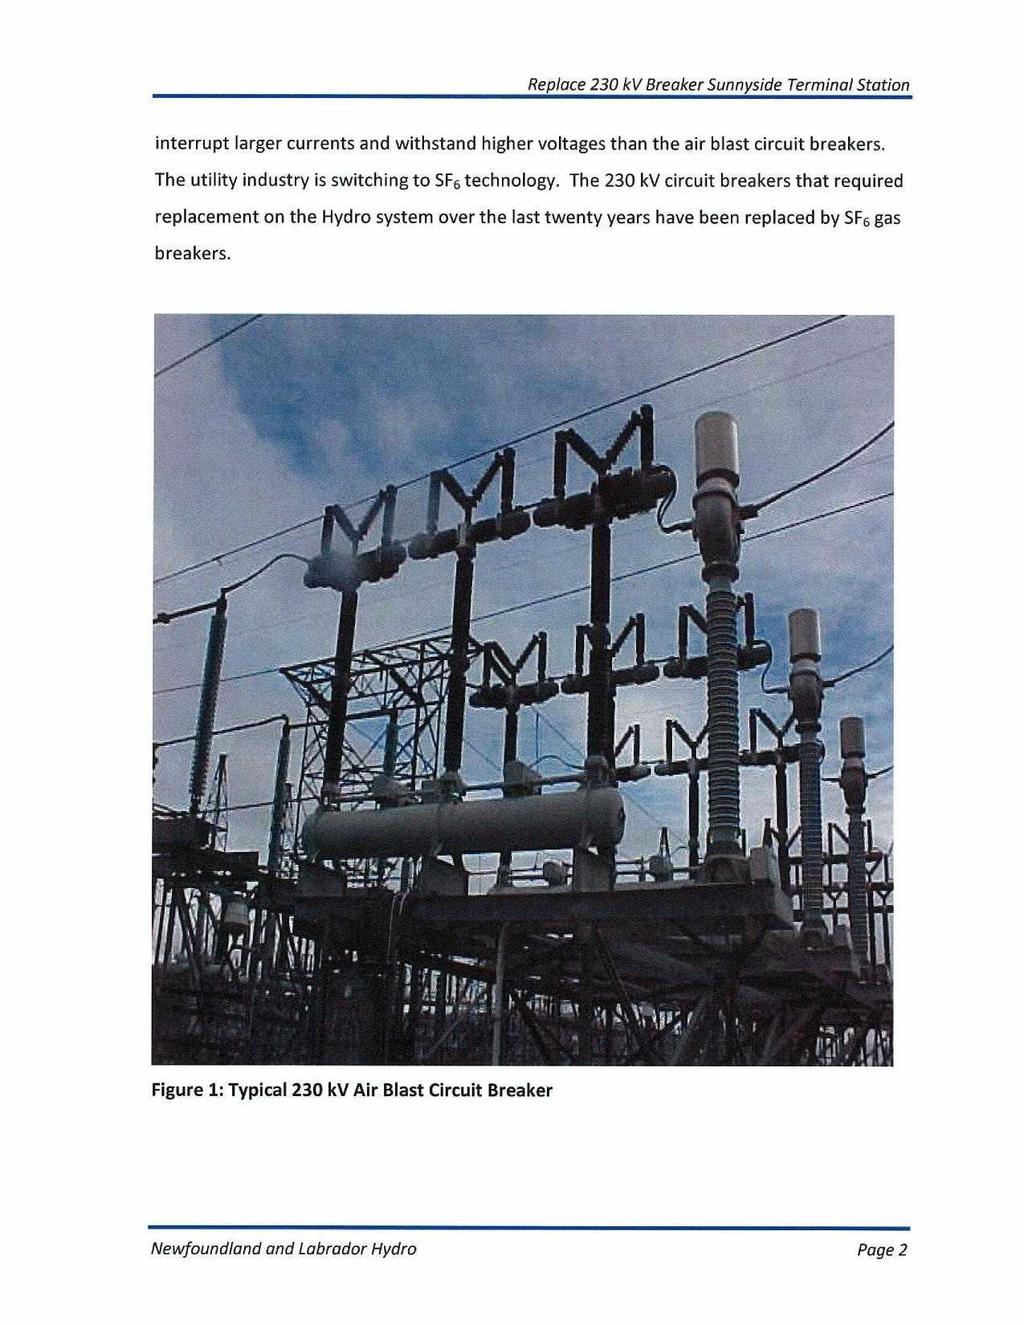 interrupt larger currents and withstand higher voltages than the air blast circuit breakers. The utility industry is switching to SF6 technology.